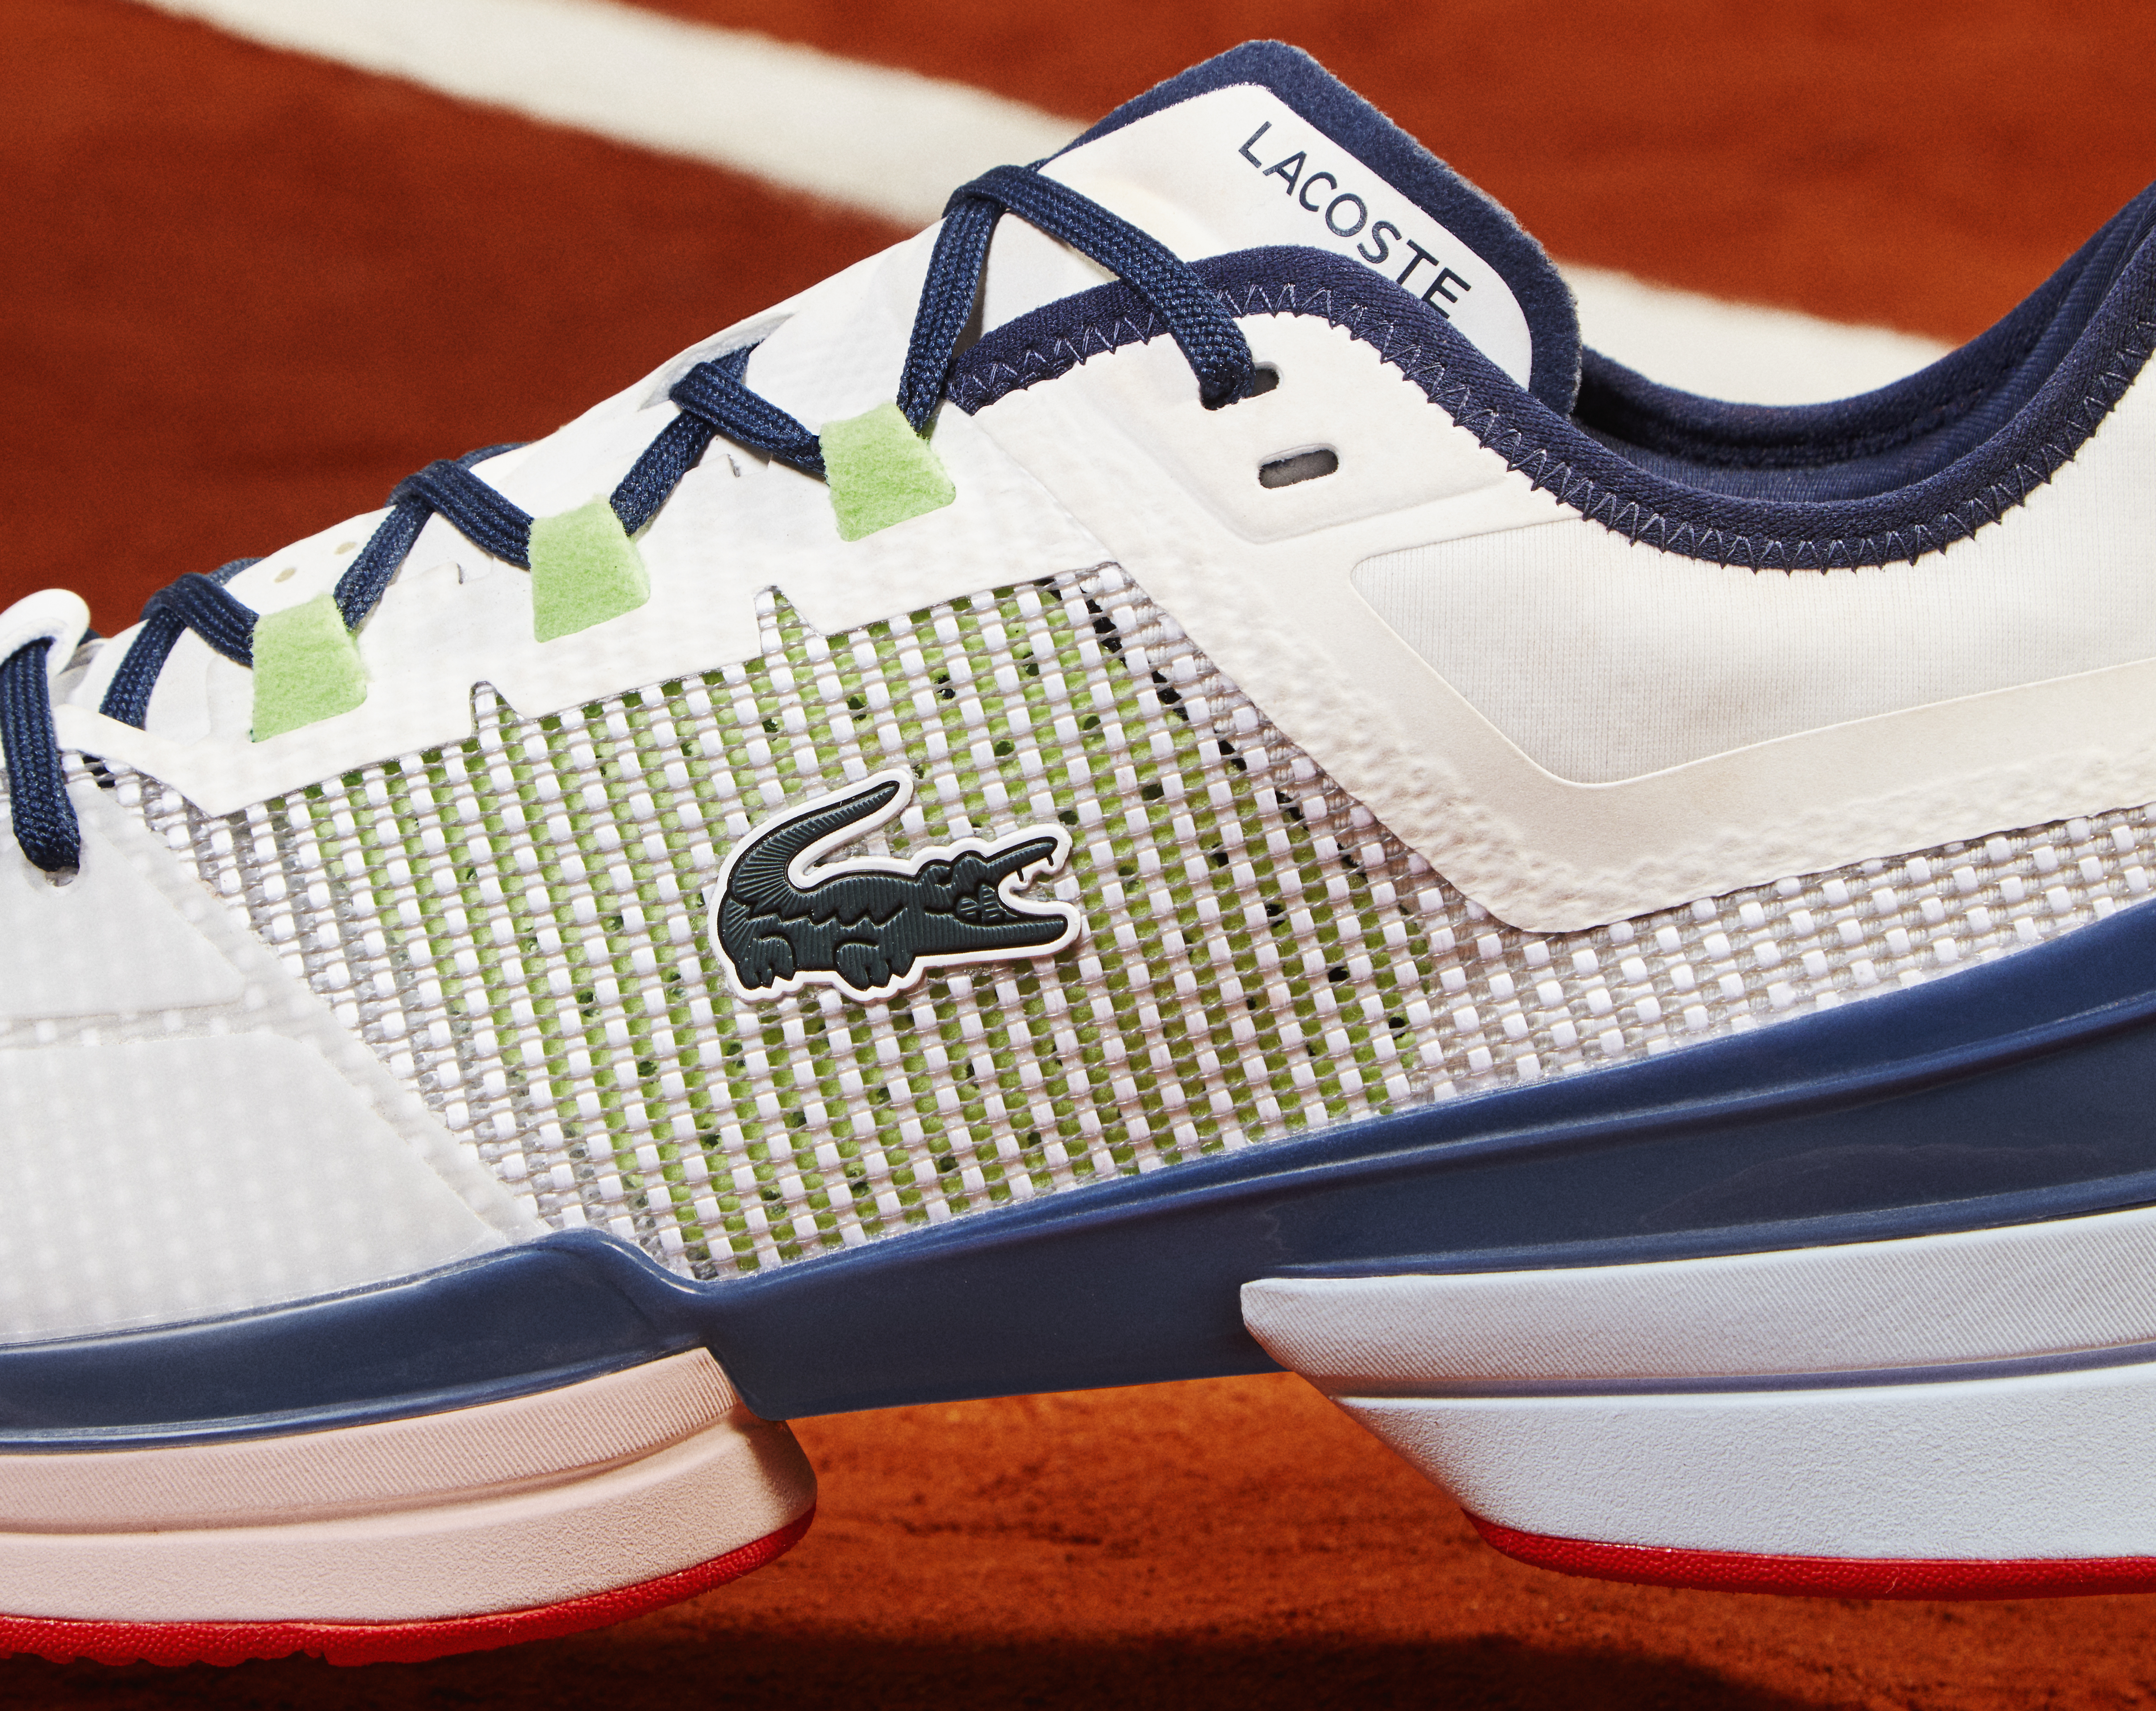 Lacoste Teams Up With Ranked Tennis Player In The World Daniil To Unveil New Ultra Sneaker - BroBible